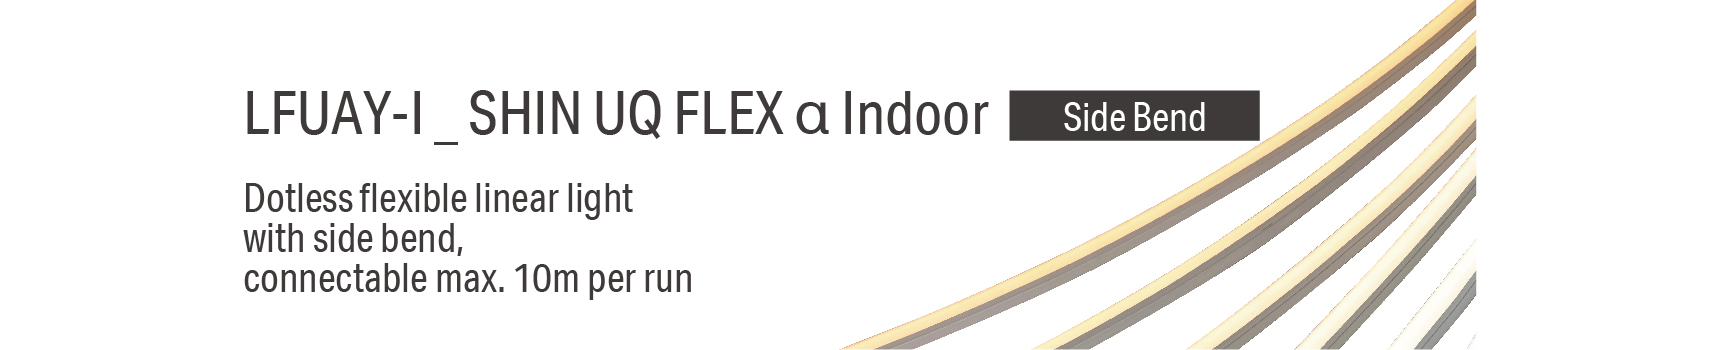 LFUAY-I _ SHIN UQ FLEX α Indoor Dotless flexible linear light with side bend, connectable max. 10m per run